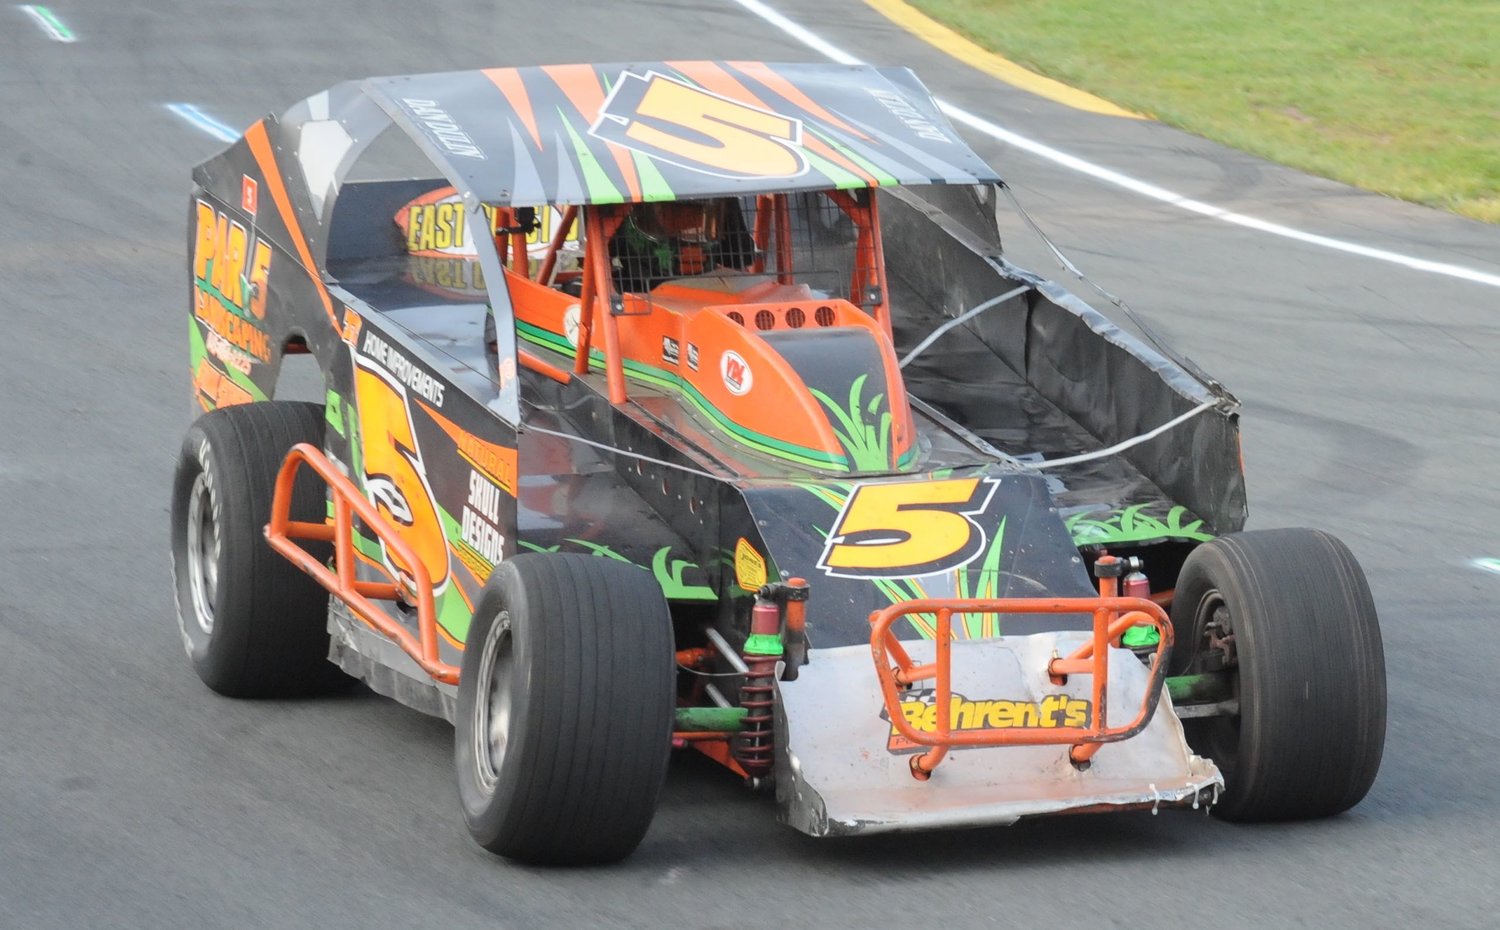 Back in time; past glories. Dan Dulin at the wheel of 358/Sportsman #5 at Bethel Motor Speedway on August 26, 2017, as he “plays though” the crowd.